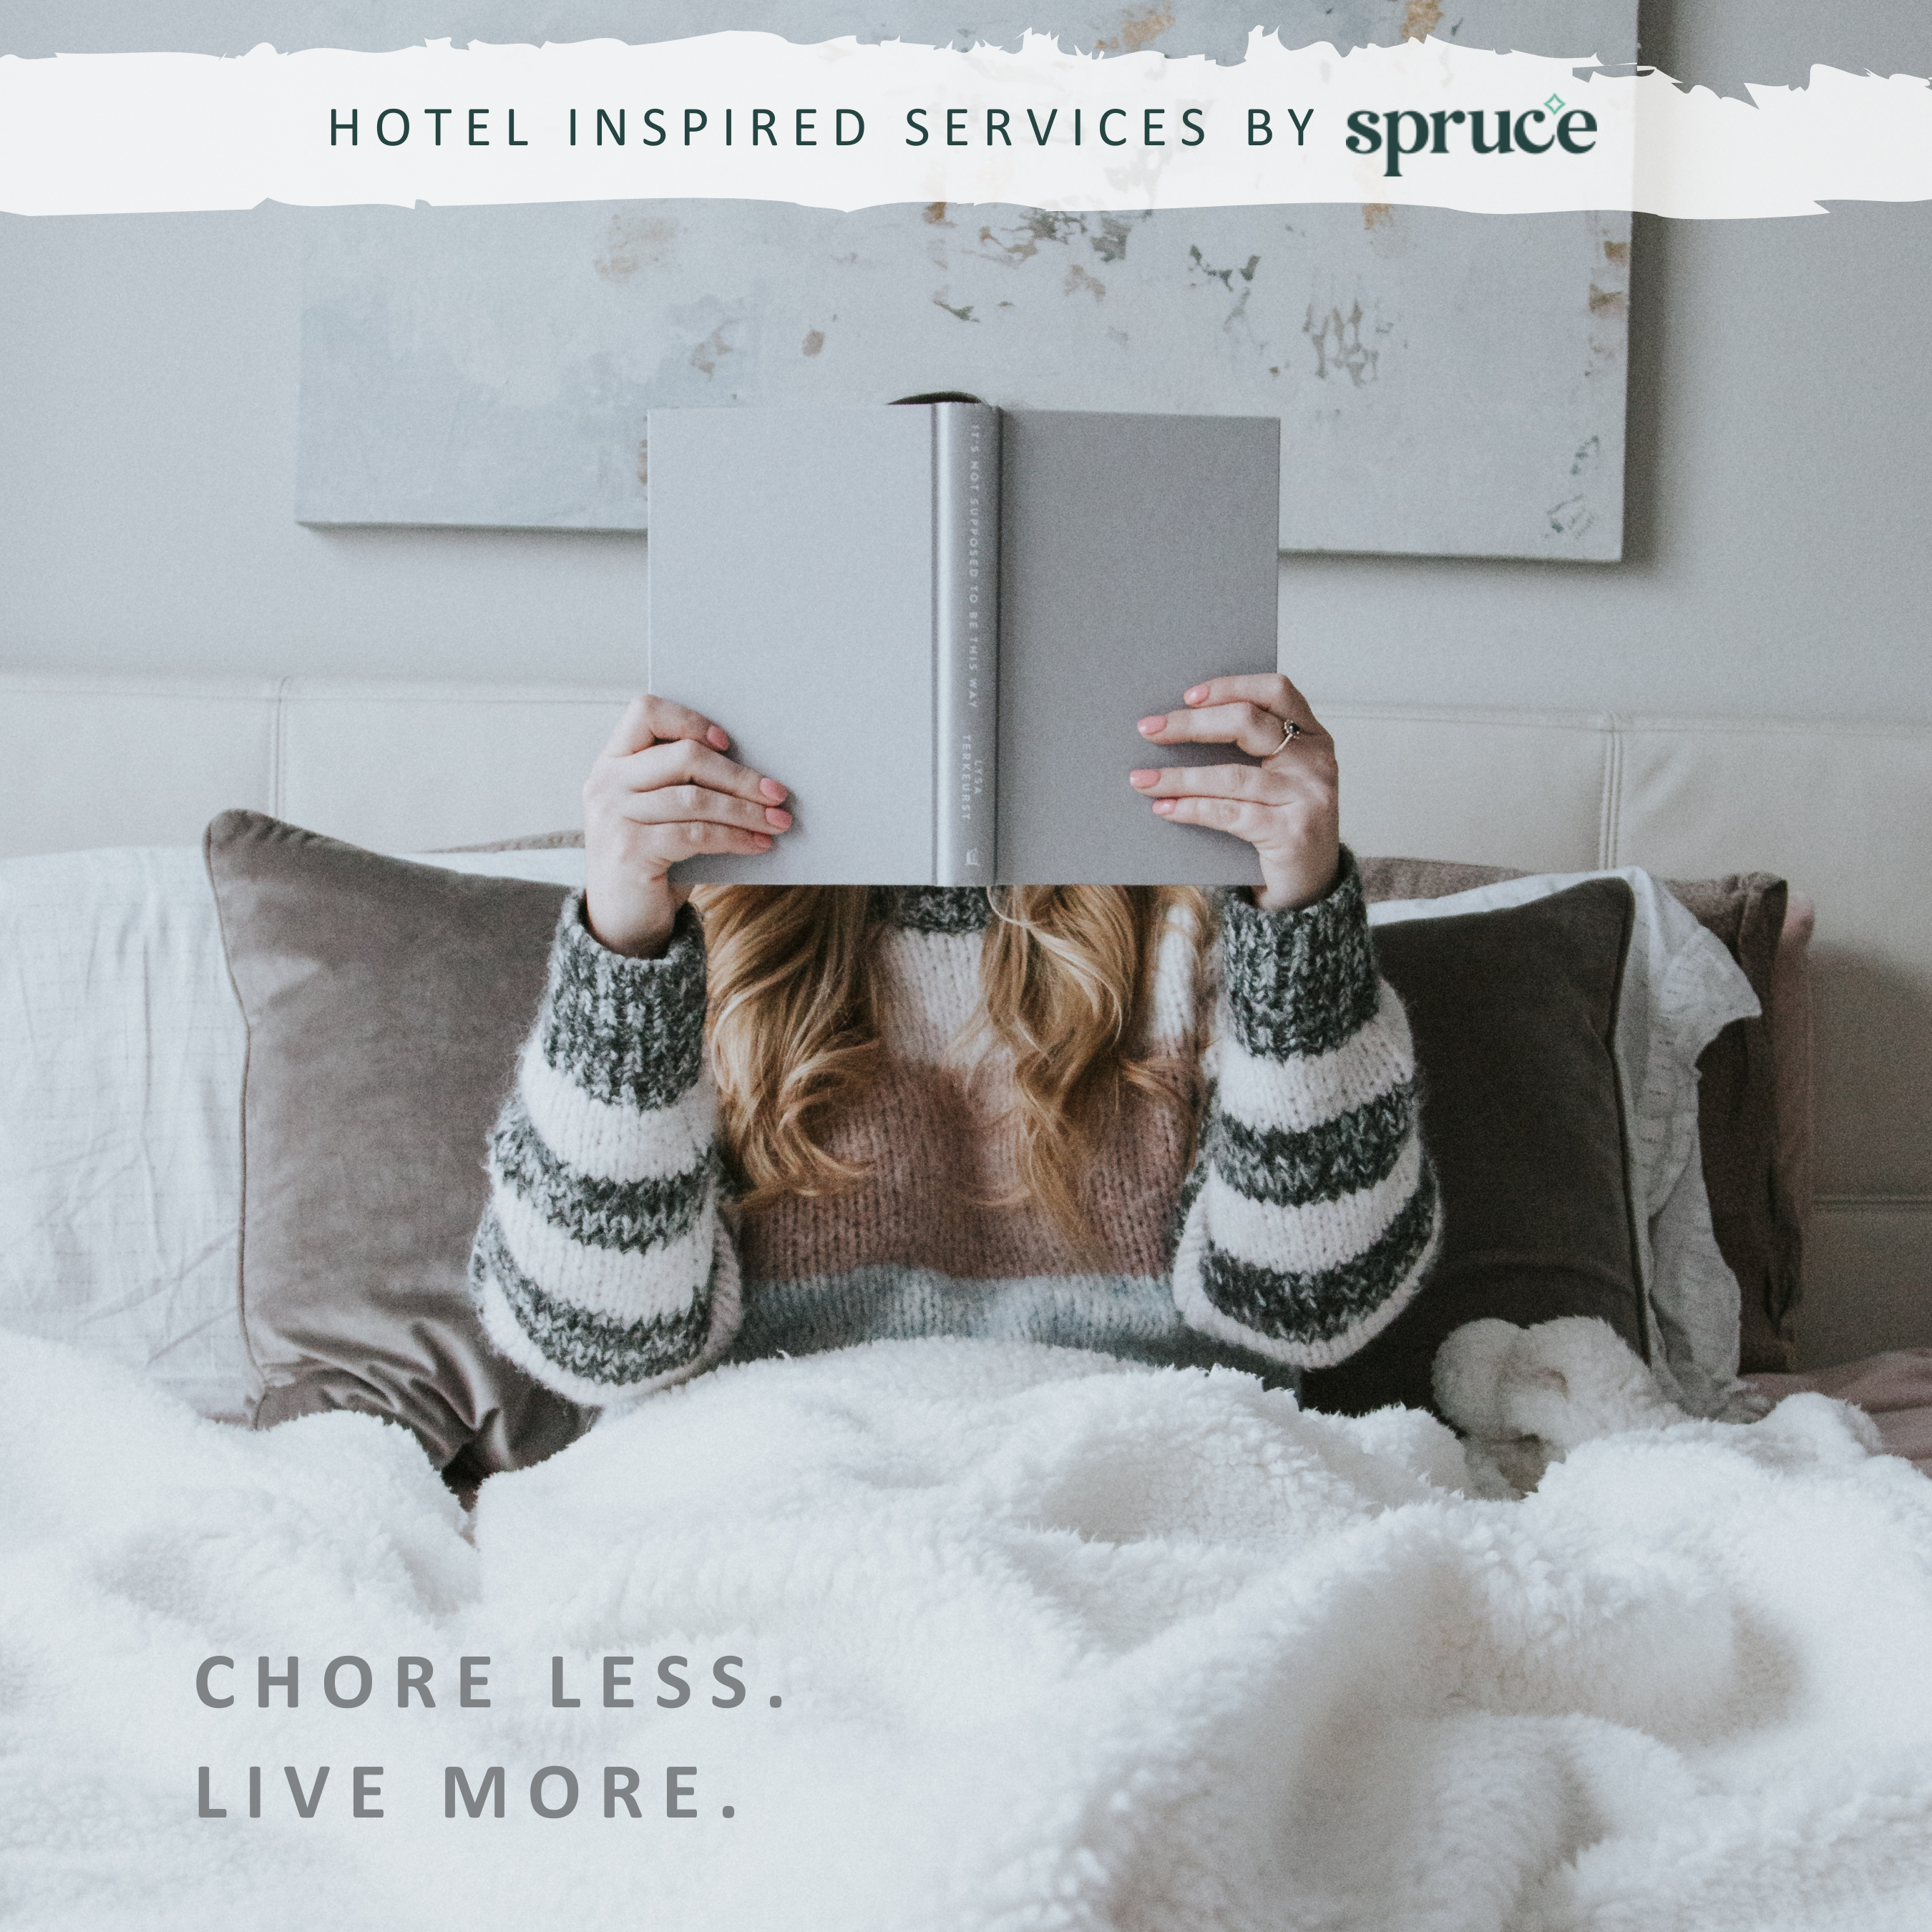 Hotel inspired services by Spruce